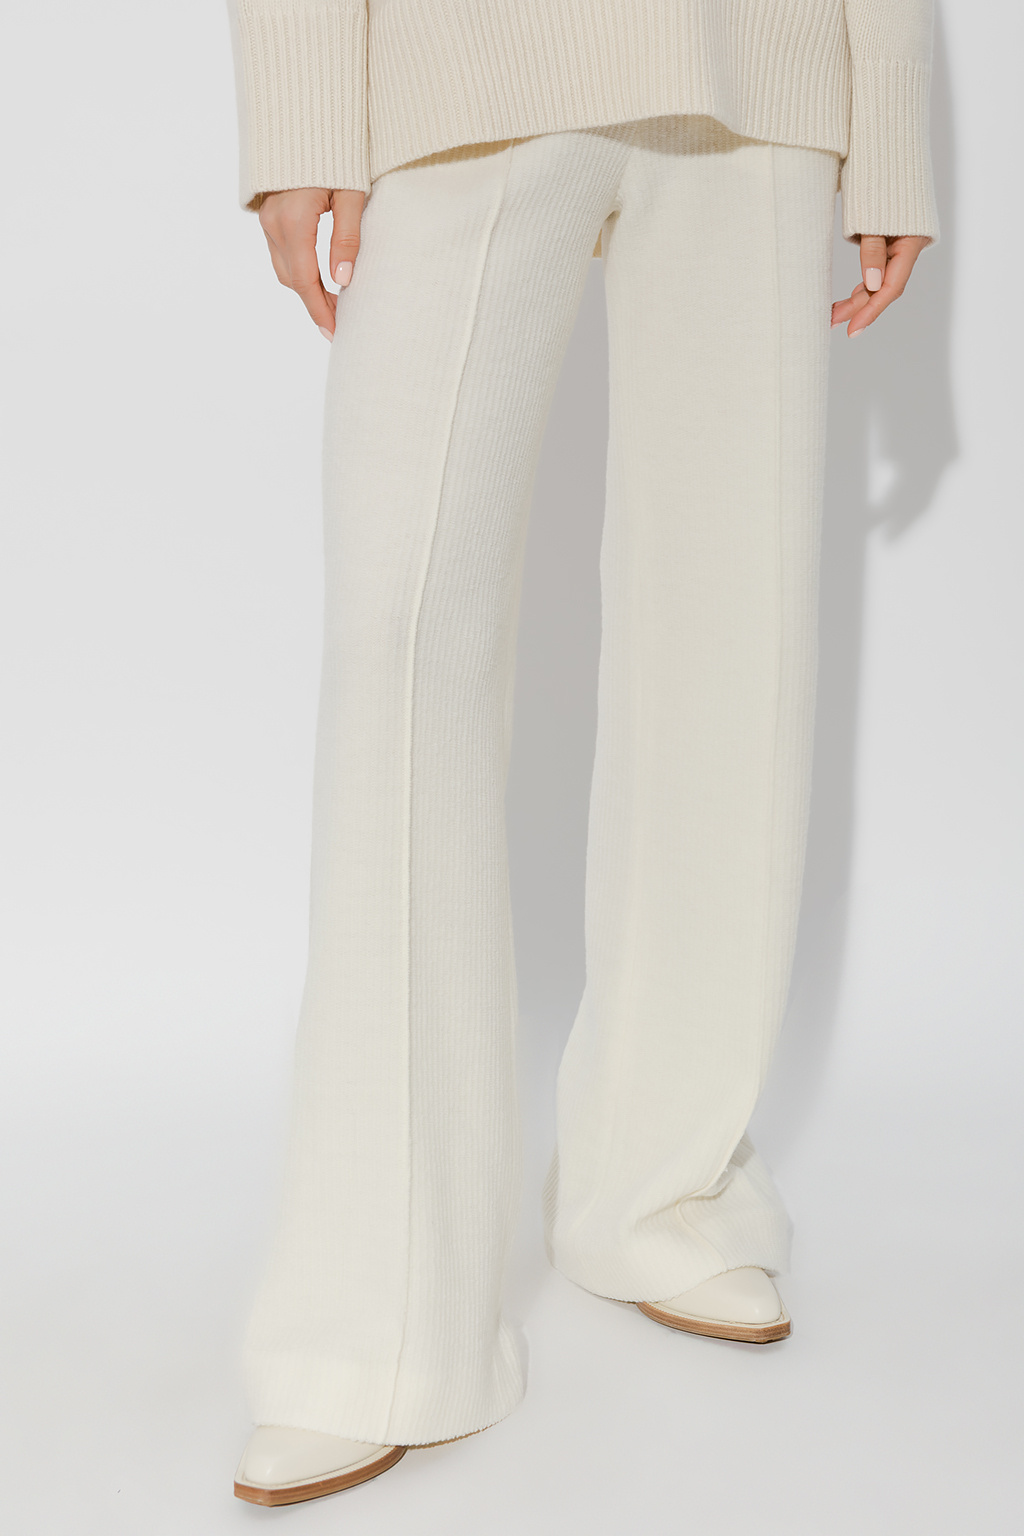 Chloé Flared jeans trousers